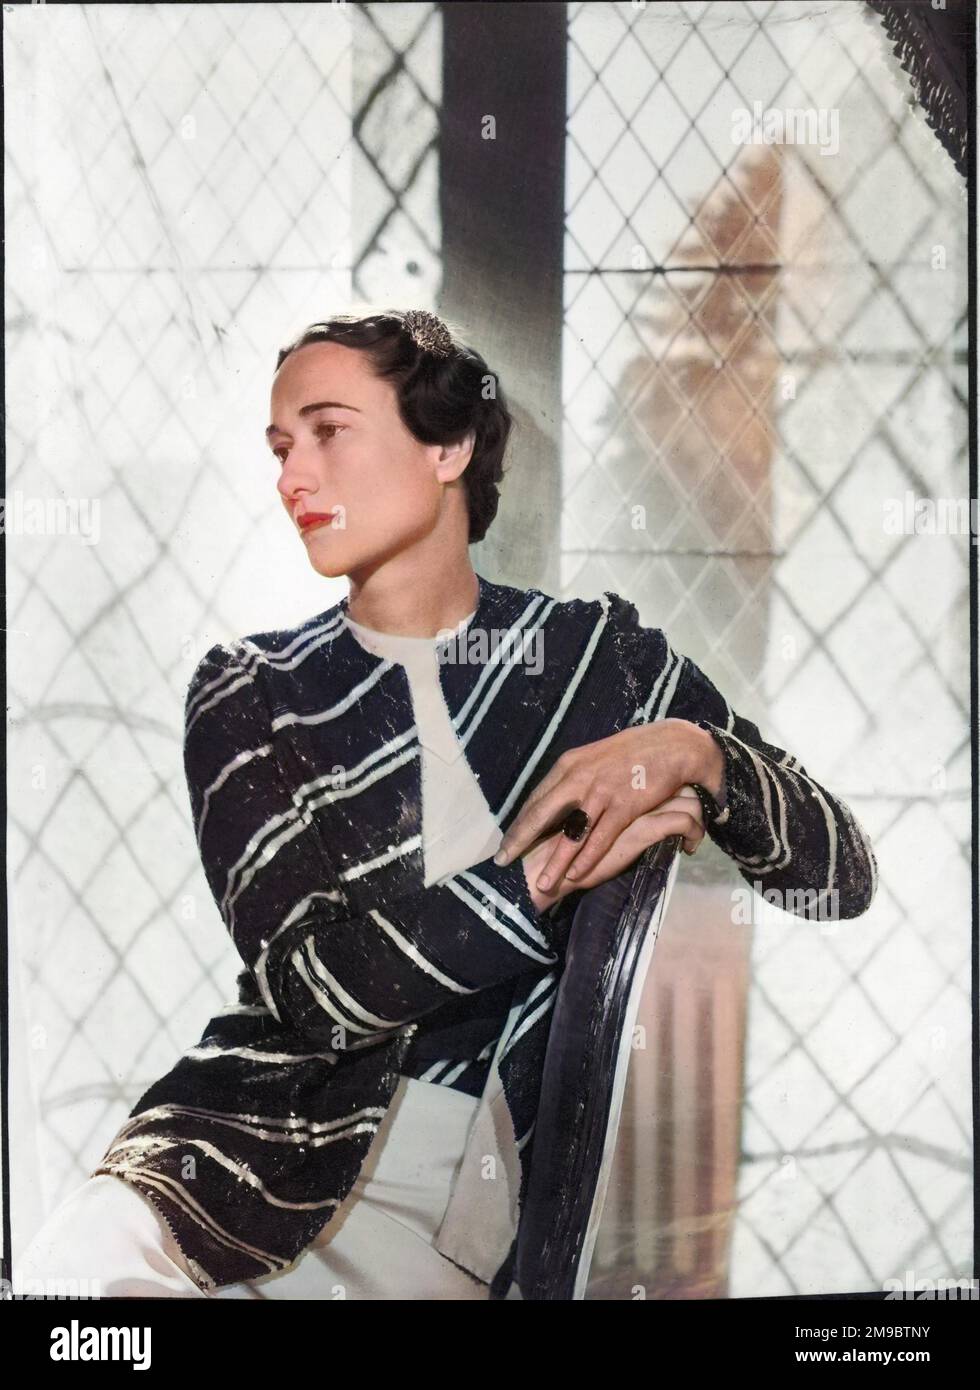 A glamorous studio portrait of Bessie Wallis Warfield Simpson, later Duchess of Windsor (1896-1986), American socialite. Born in Blue Ridge Summit, Pennsylvania, she divorced her second husband, Ernest Simpson in order to marry Edward VIII who abdicated the throne in December 1936 to marry her. Stock Photo